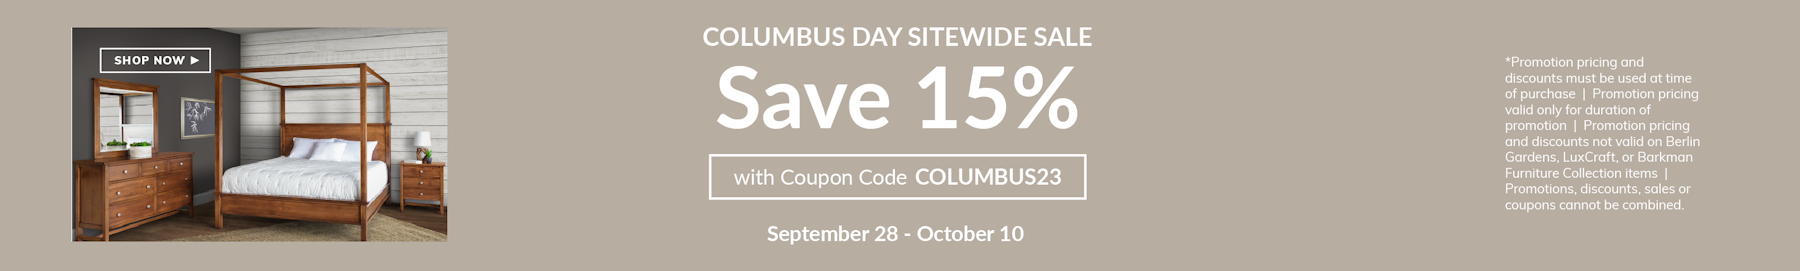 Columbus Day Sitewide Sale